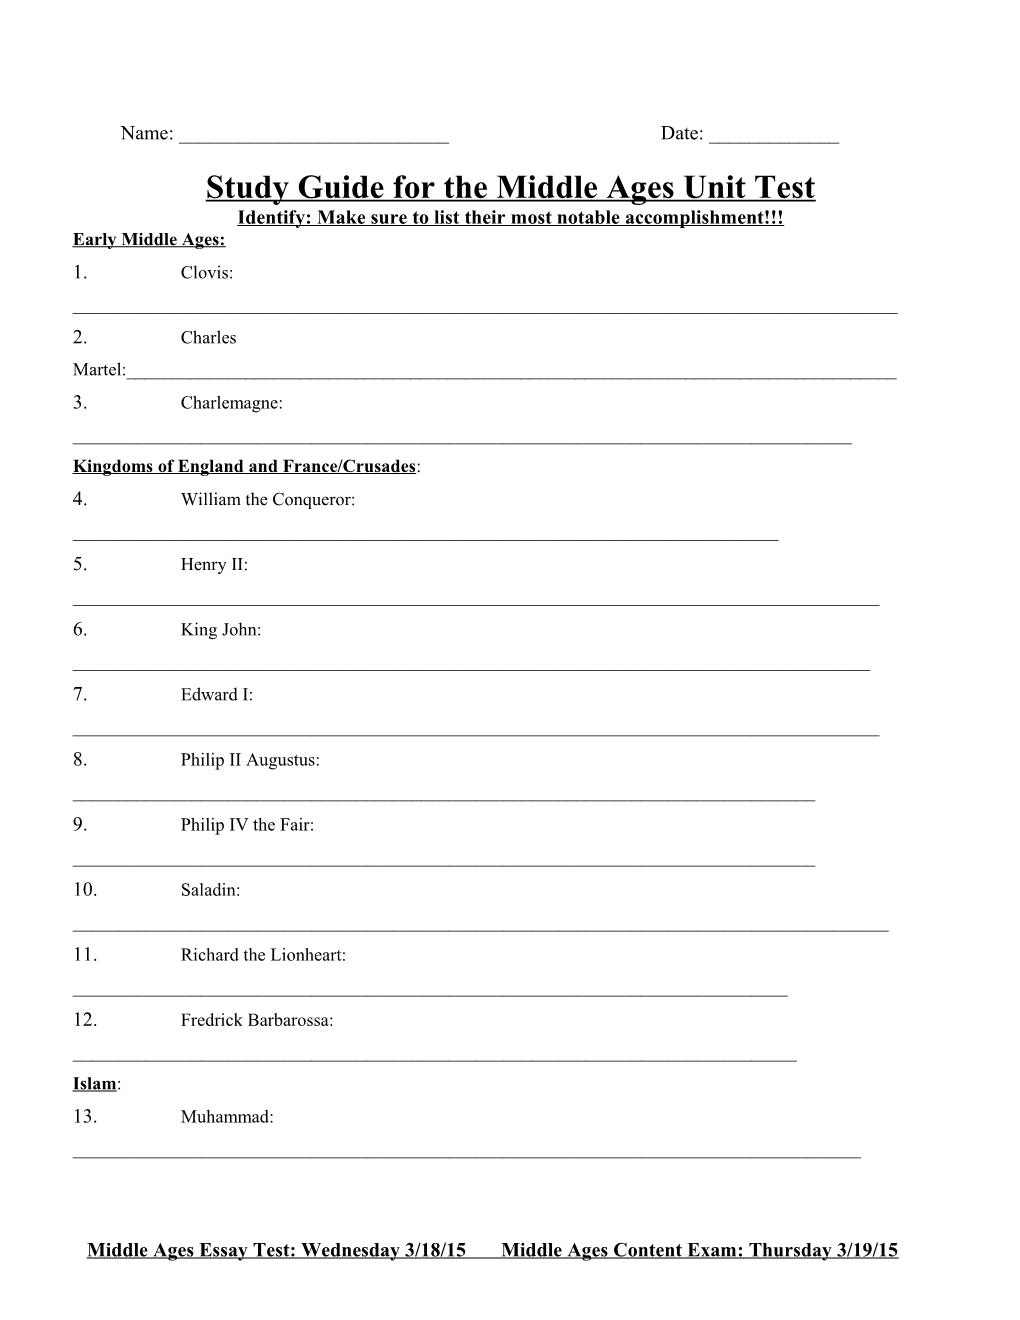 Study Guide for the Middle Ages Unit Test